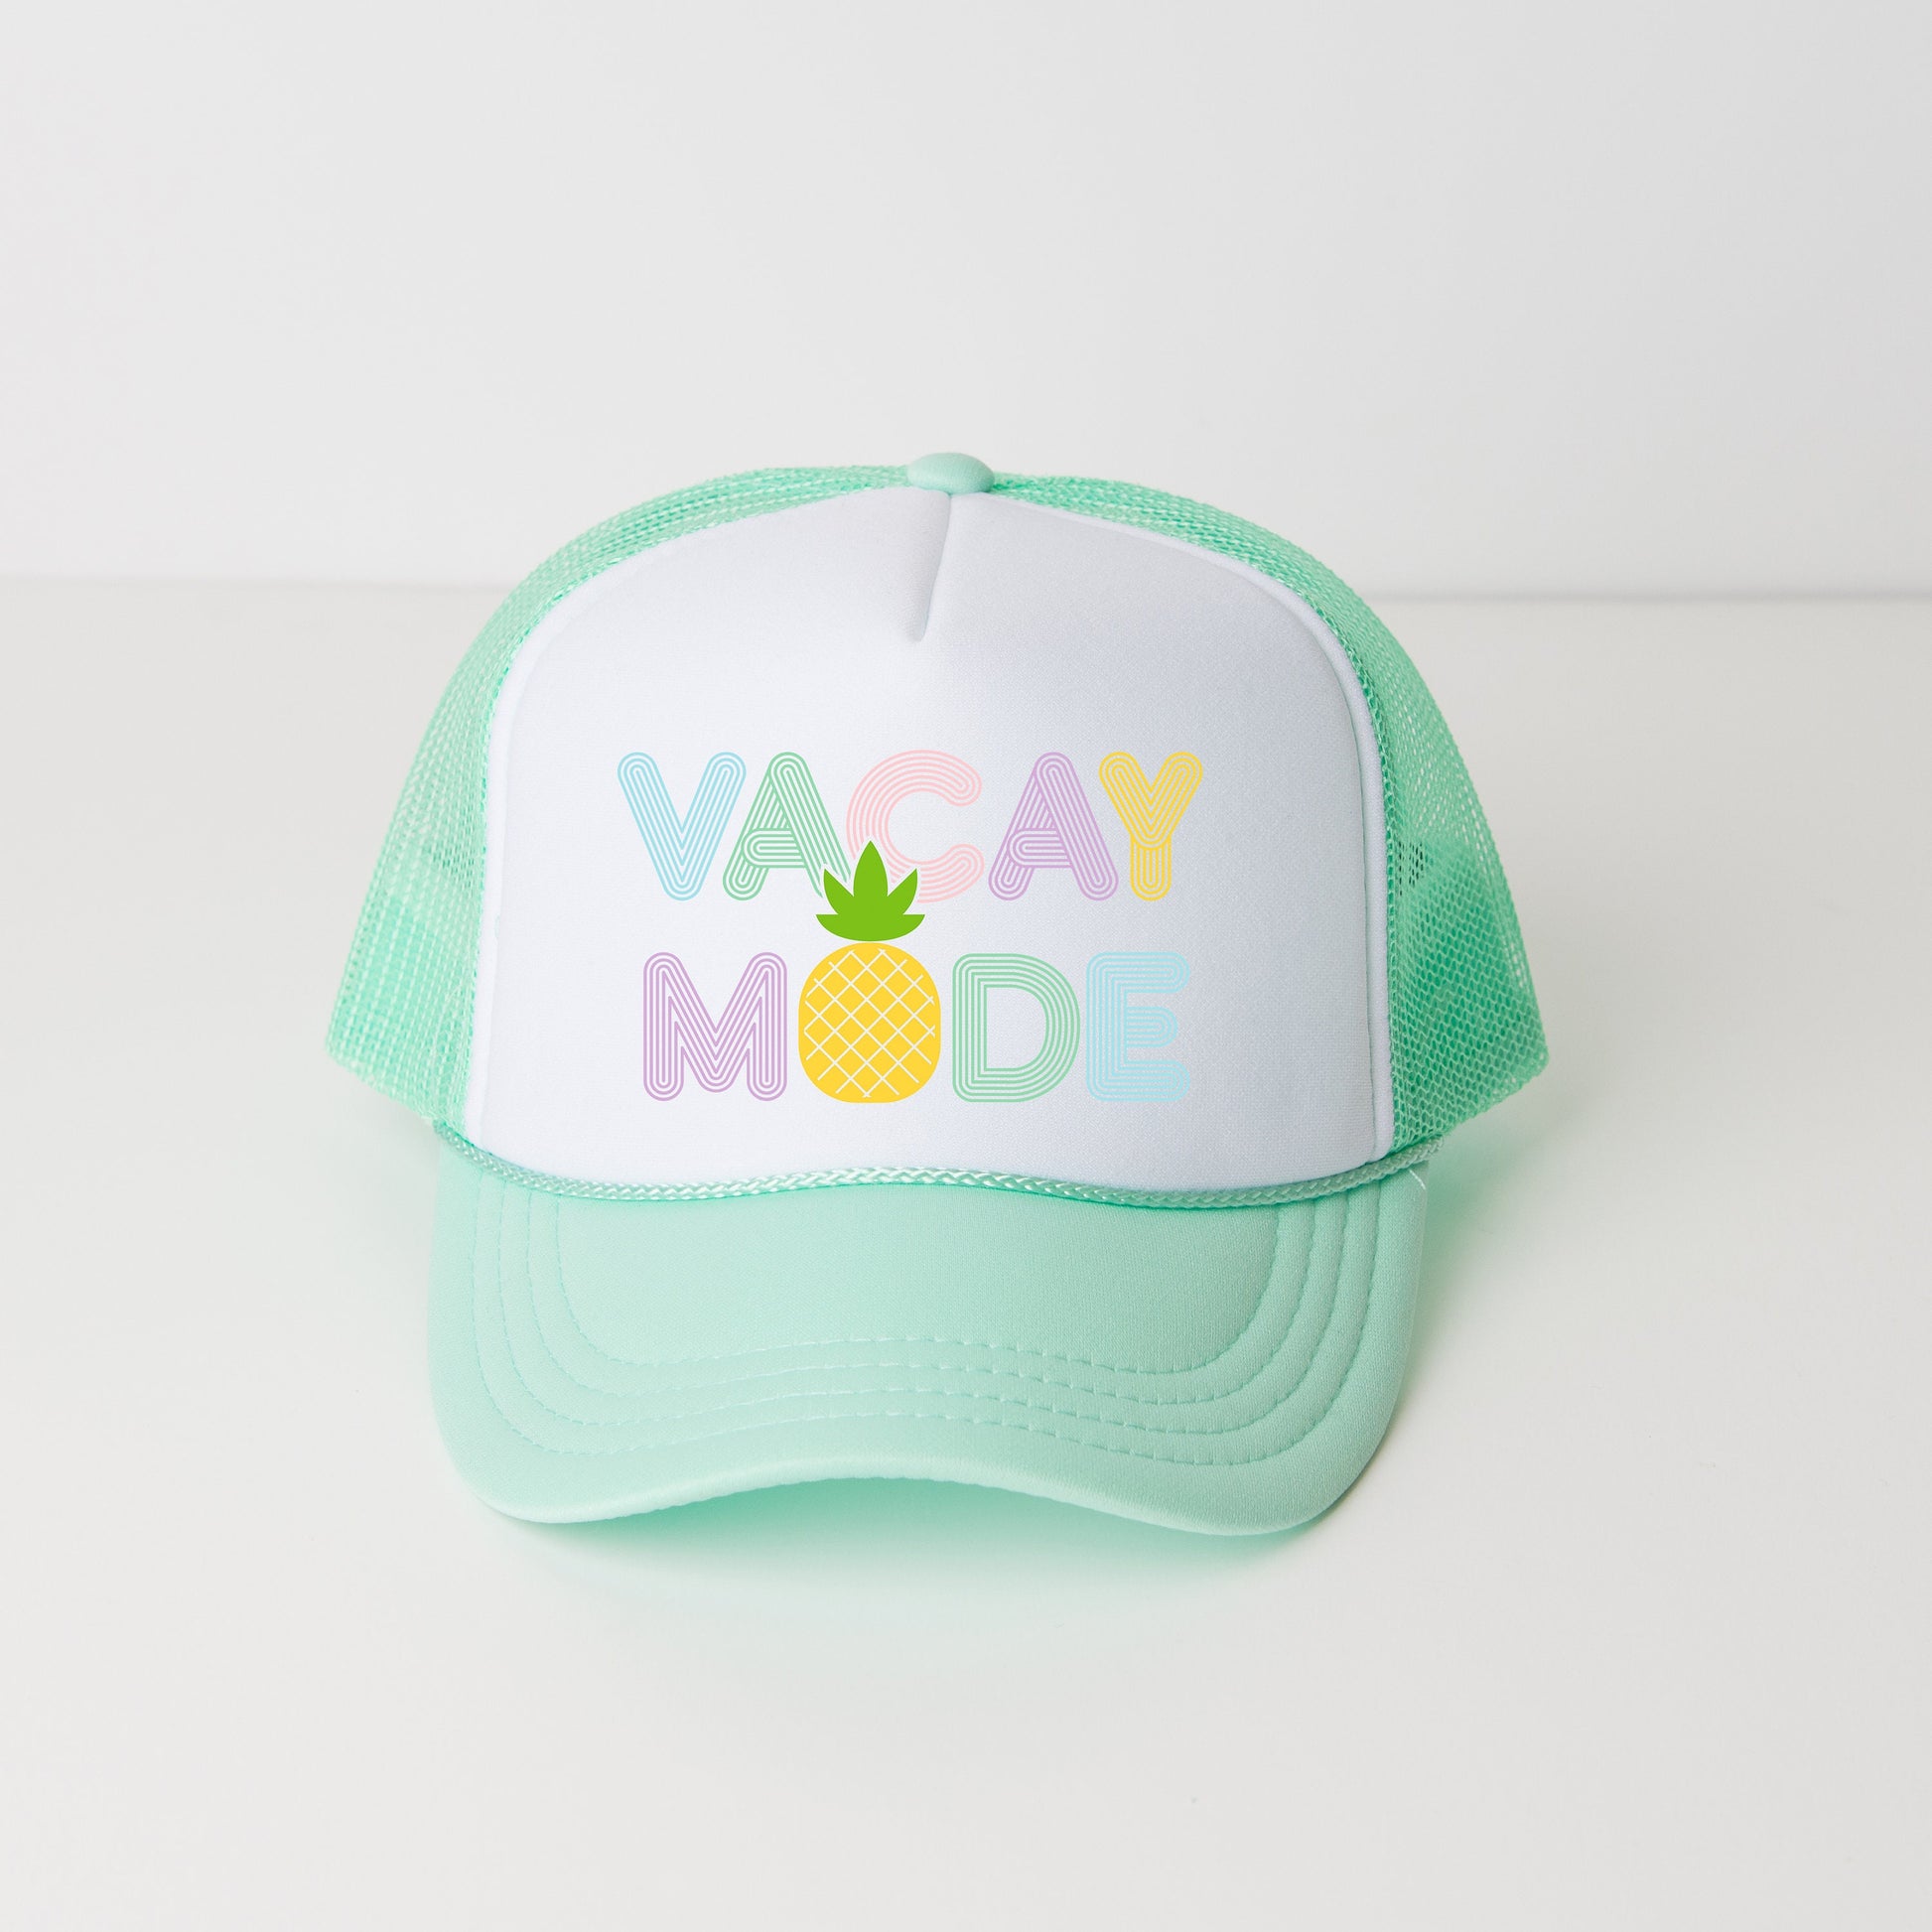 a green and white trucker hat that says vacay mode